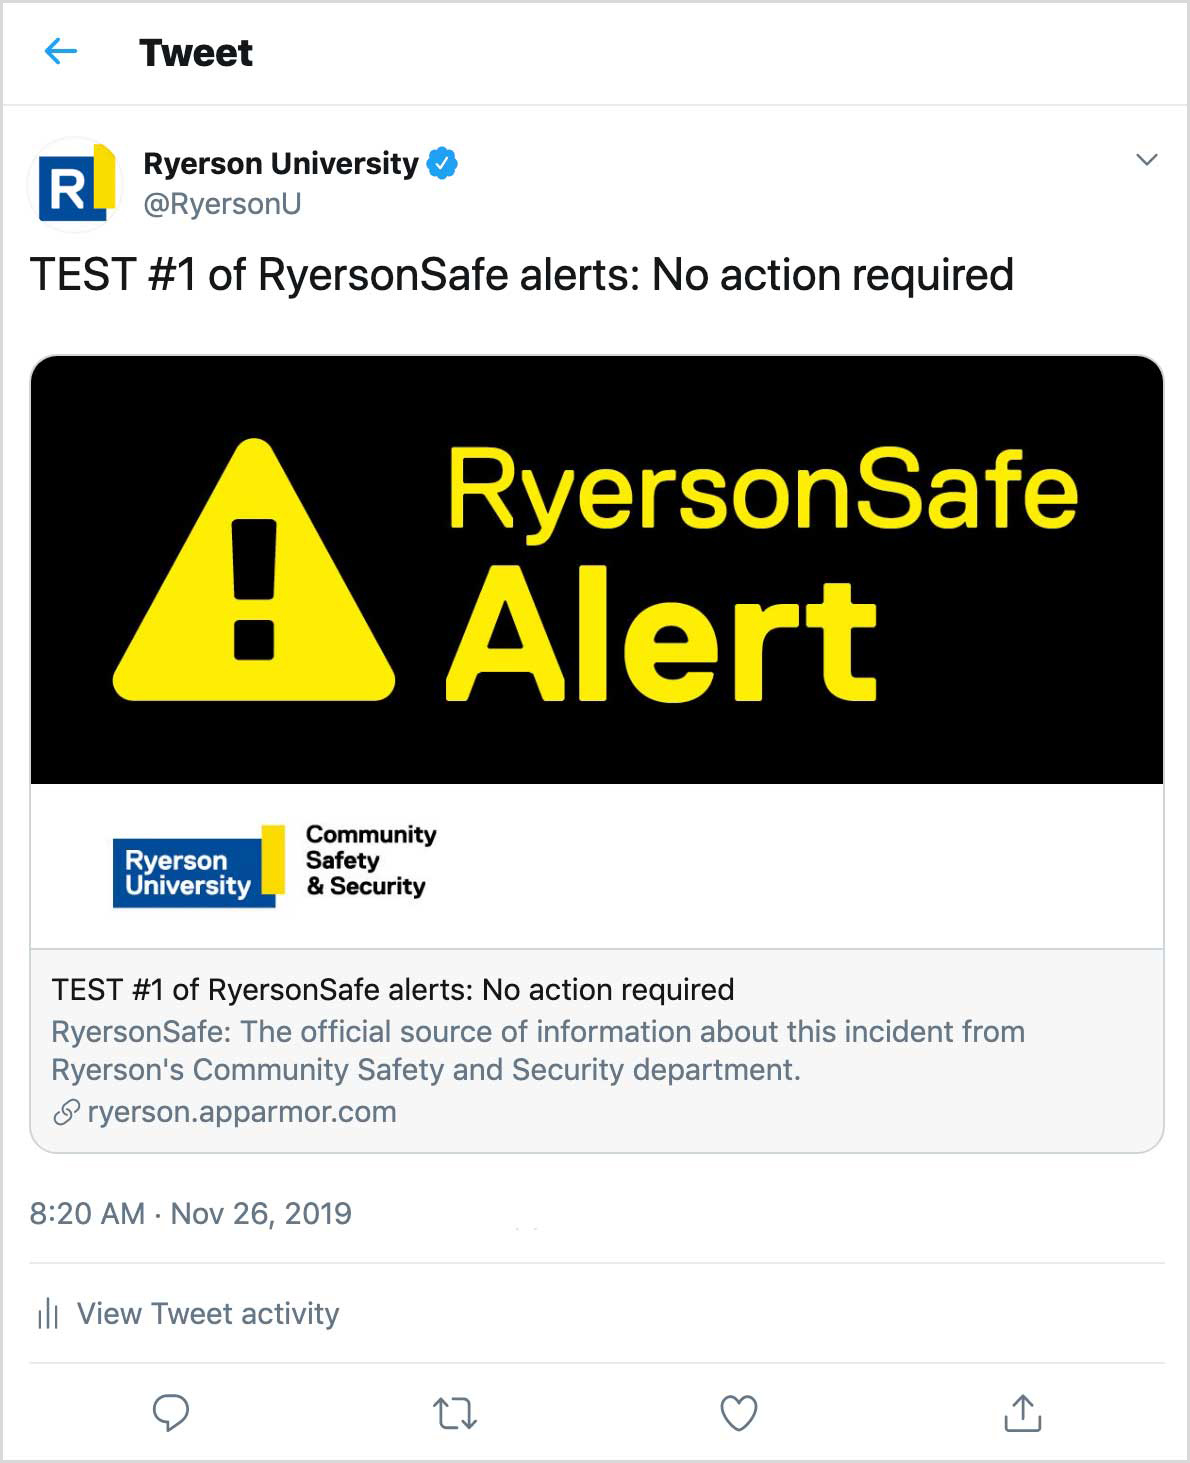 A Tweet from Ryerson University with test alert content pointing to RyersonSafe.